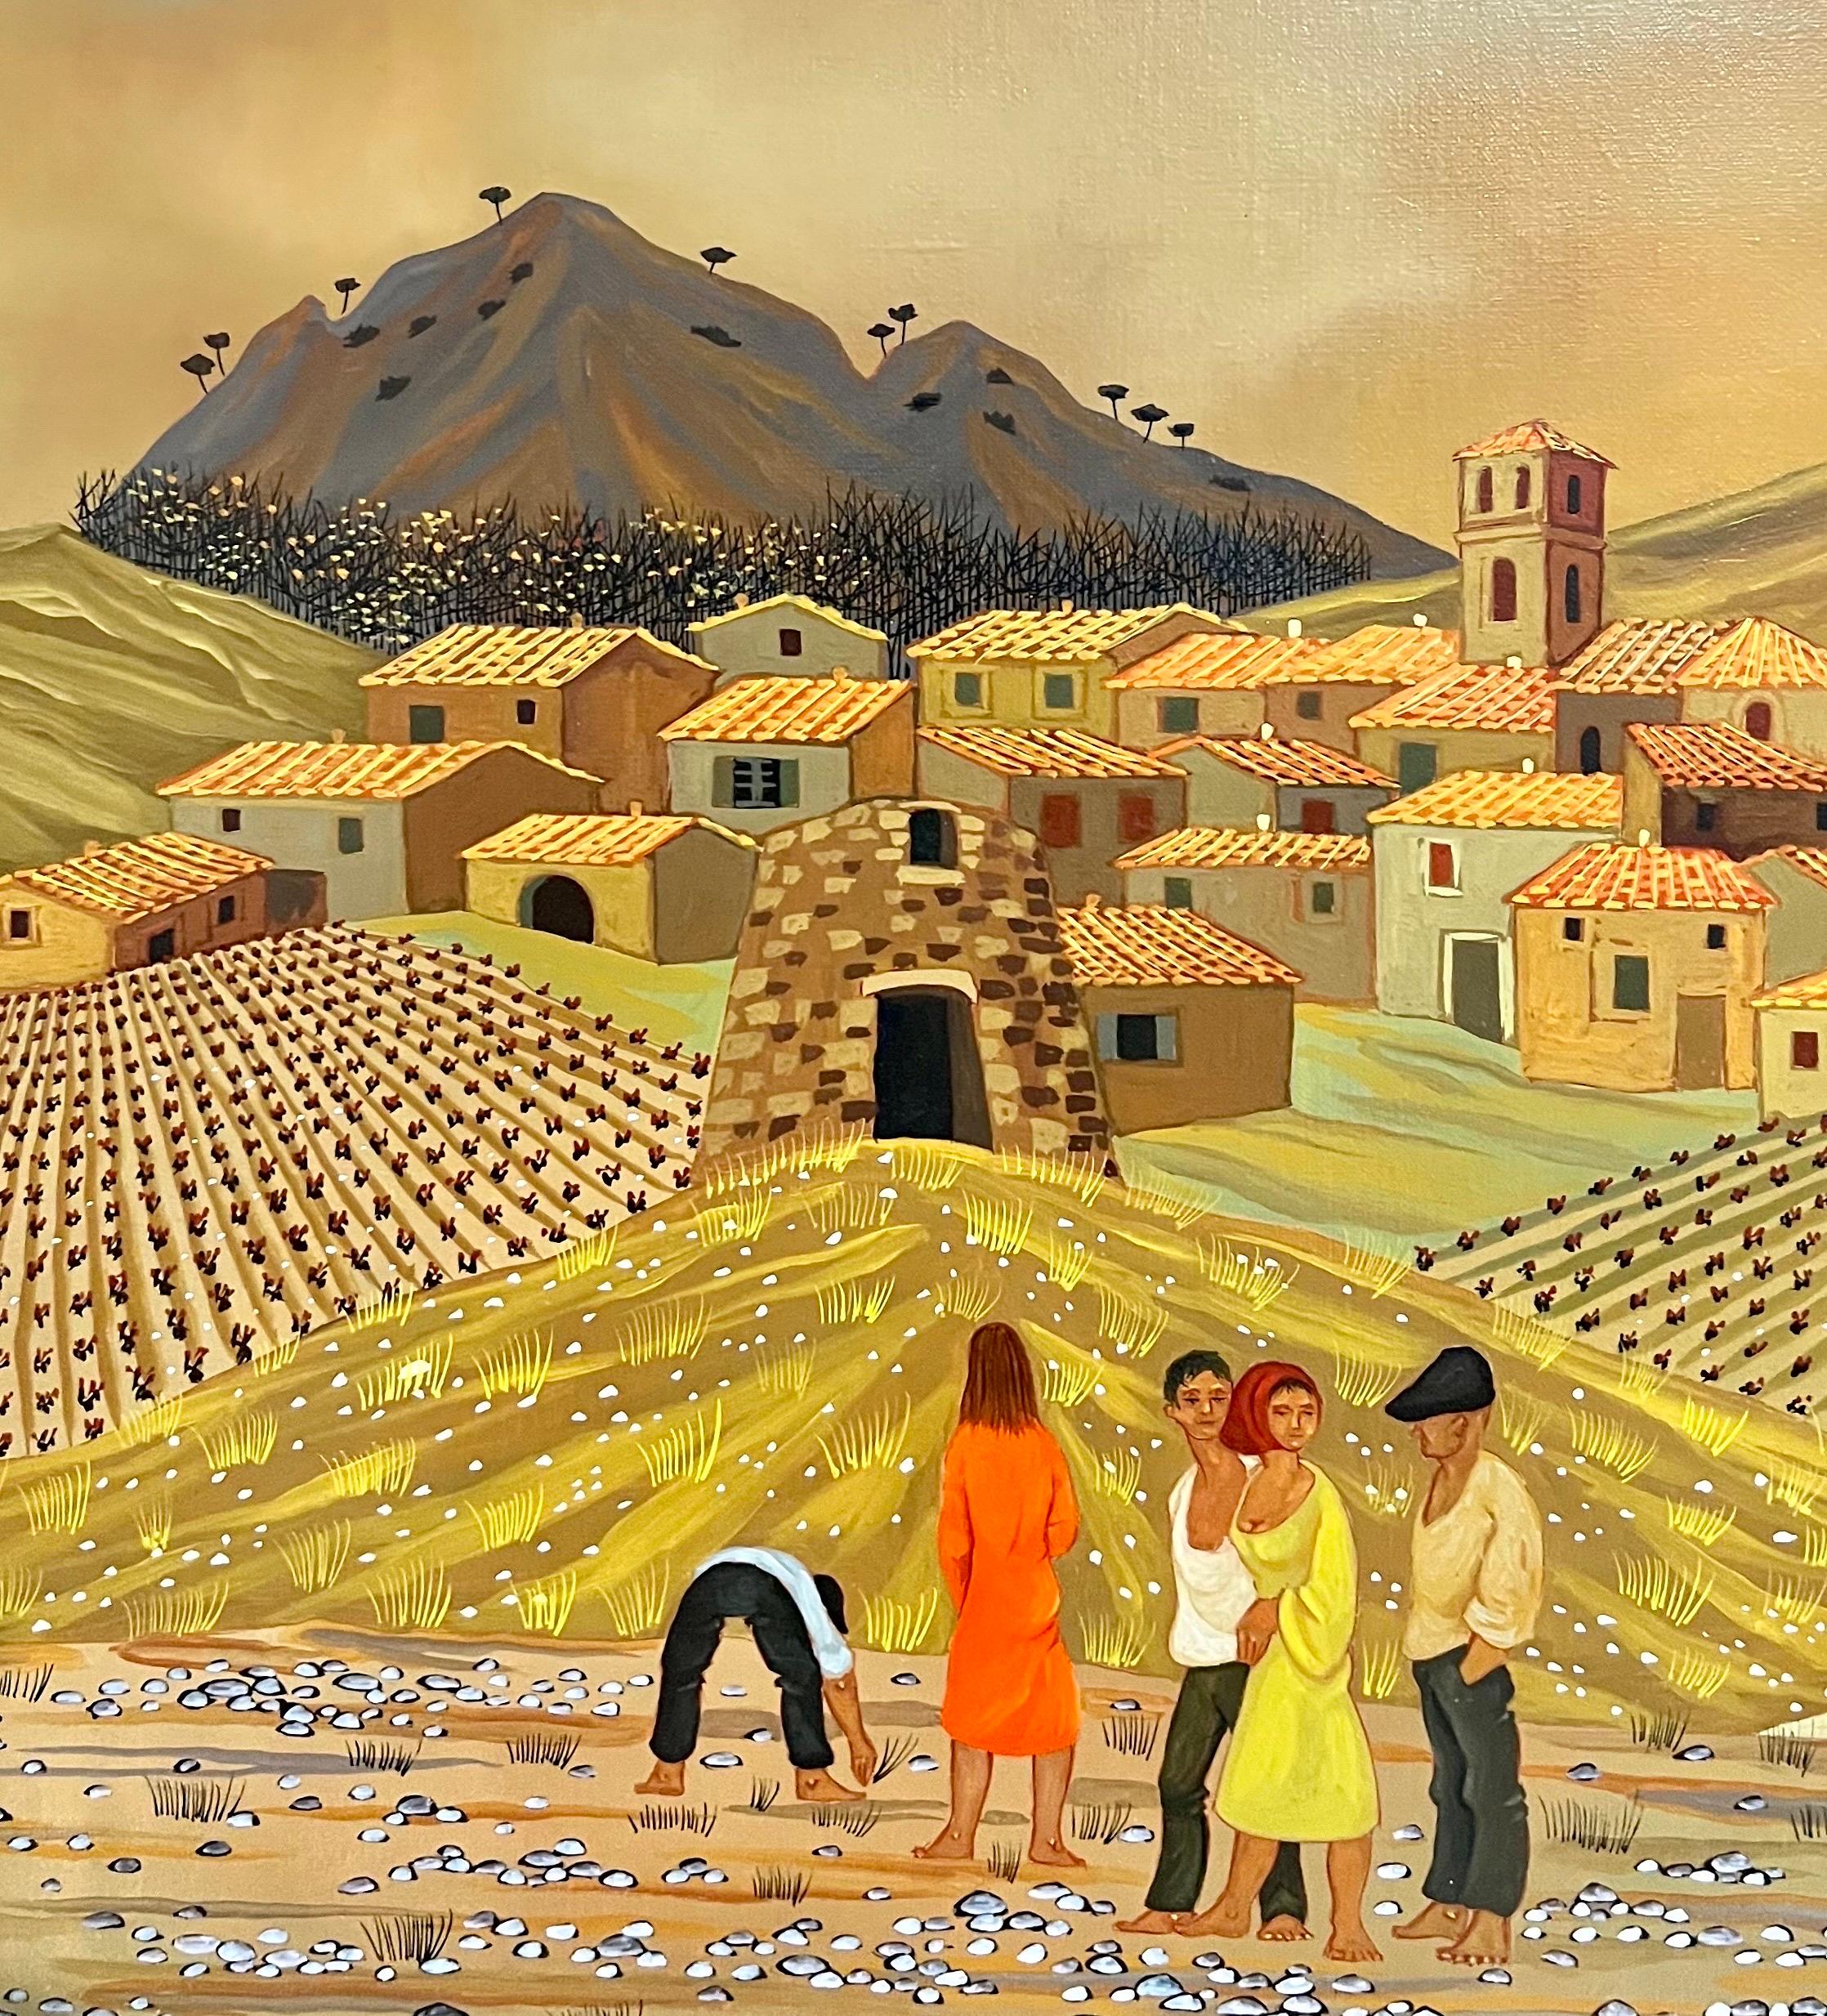 Max Savy Oil on canvas painting depicting a  village scene with winemakers in a vineyard by artist Max Savy (French, b.  1918). Signed in the lower right. Frame measures 24.5 inches x 28 inches.  canvas is 18 X 22 inches.,
Perfect for a wine cellar